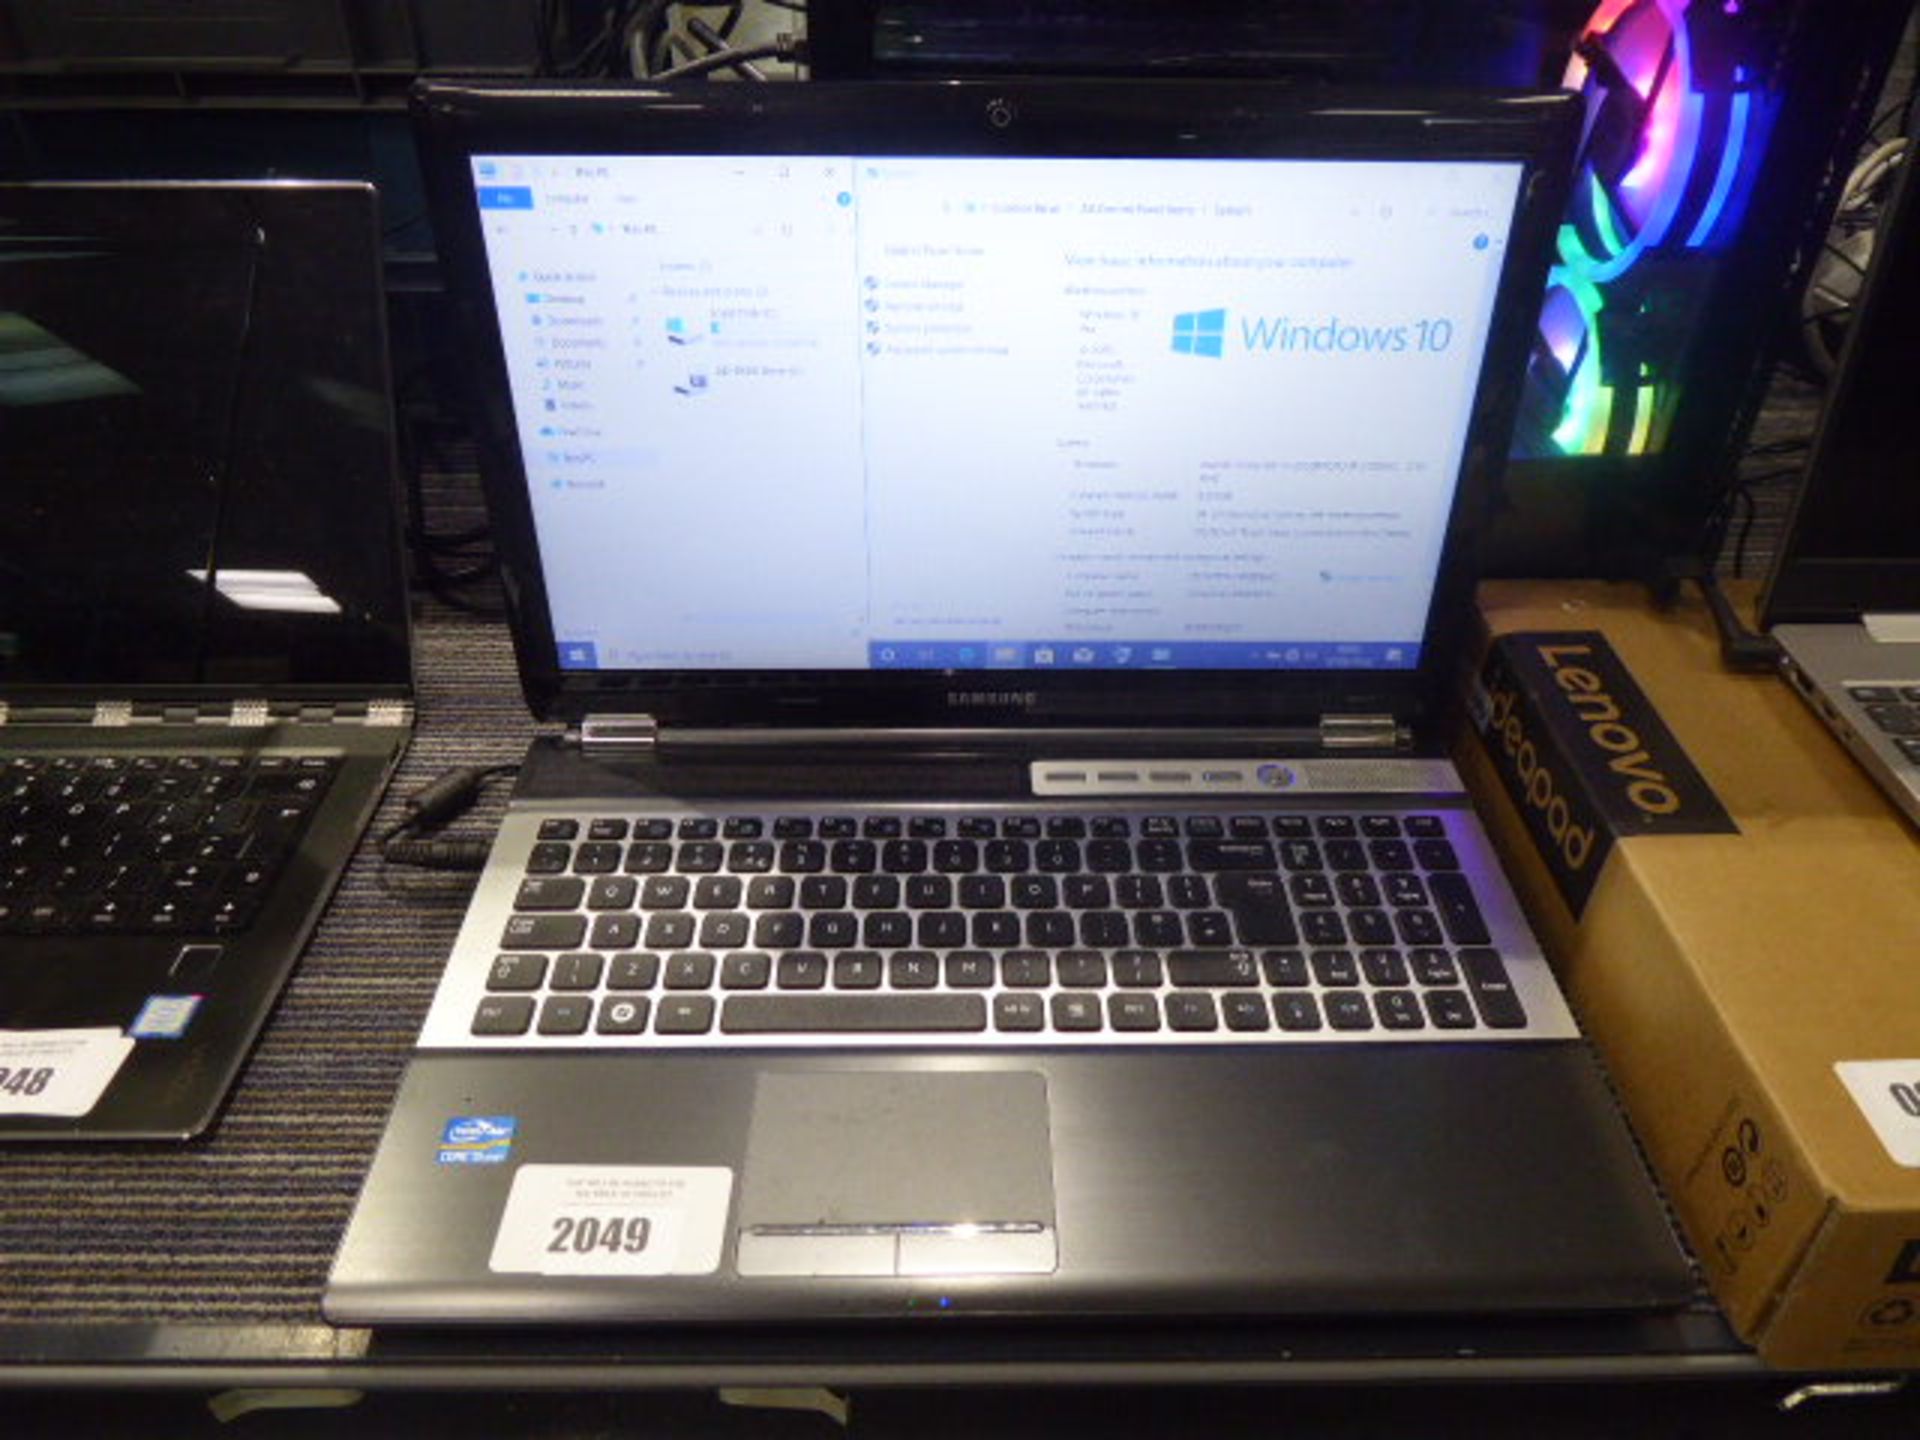 Samsung laptop core i5 8gb ram, 750gb hdd with blu ray disc player, Windows 10 installed, with power